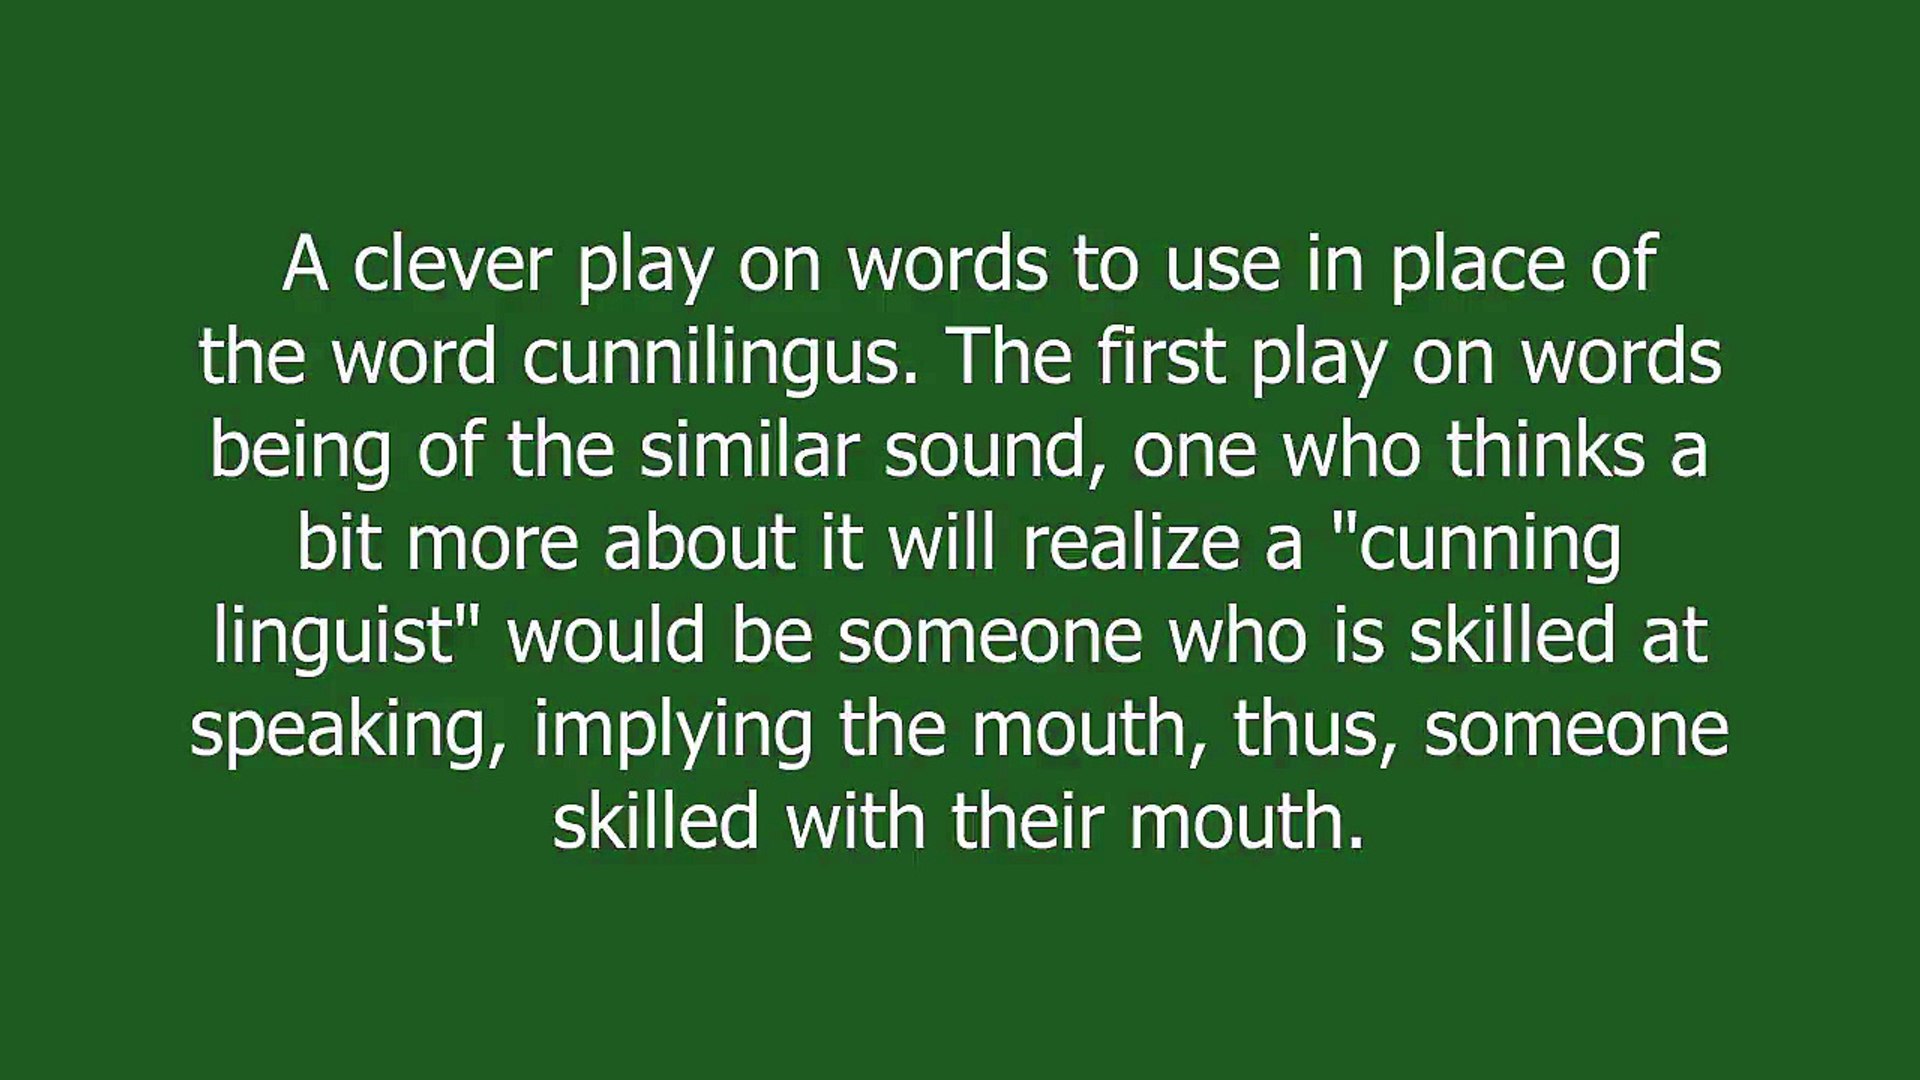 cunning linguist meaning and pronunciation - video Dailymotion